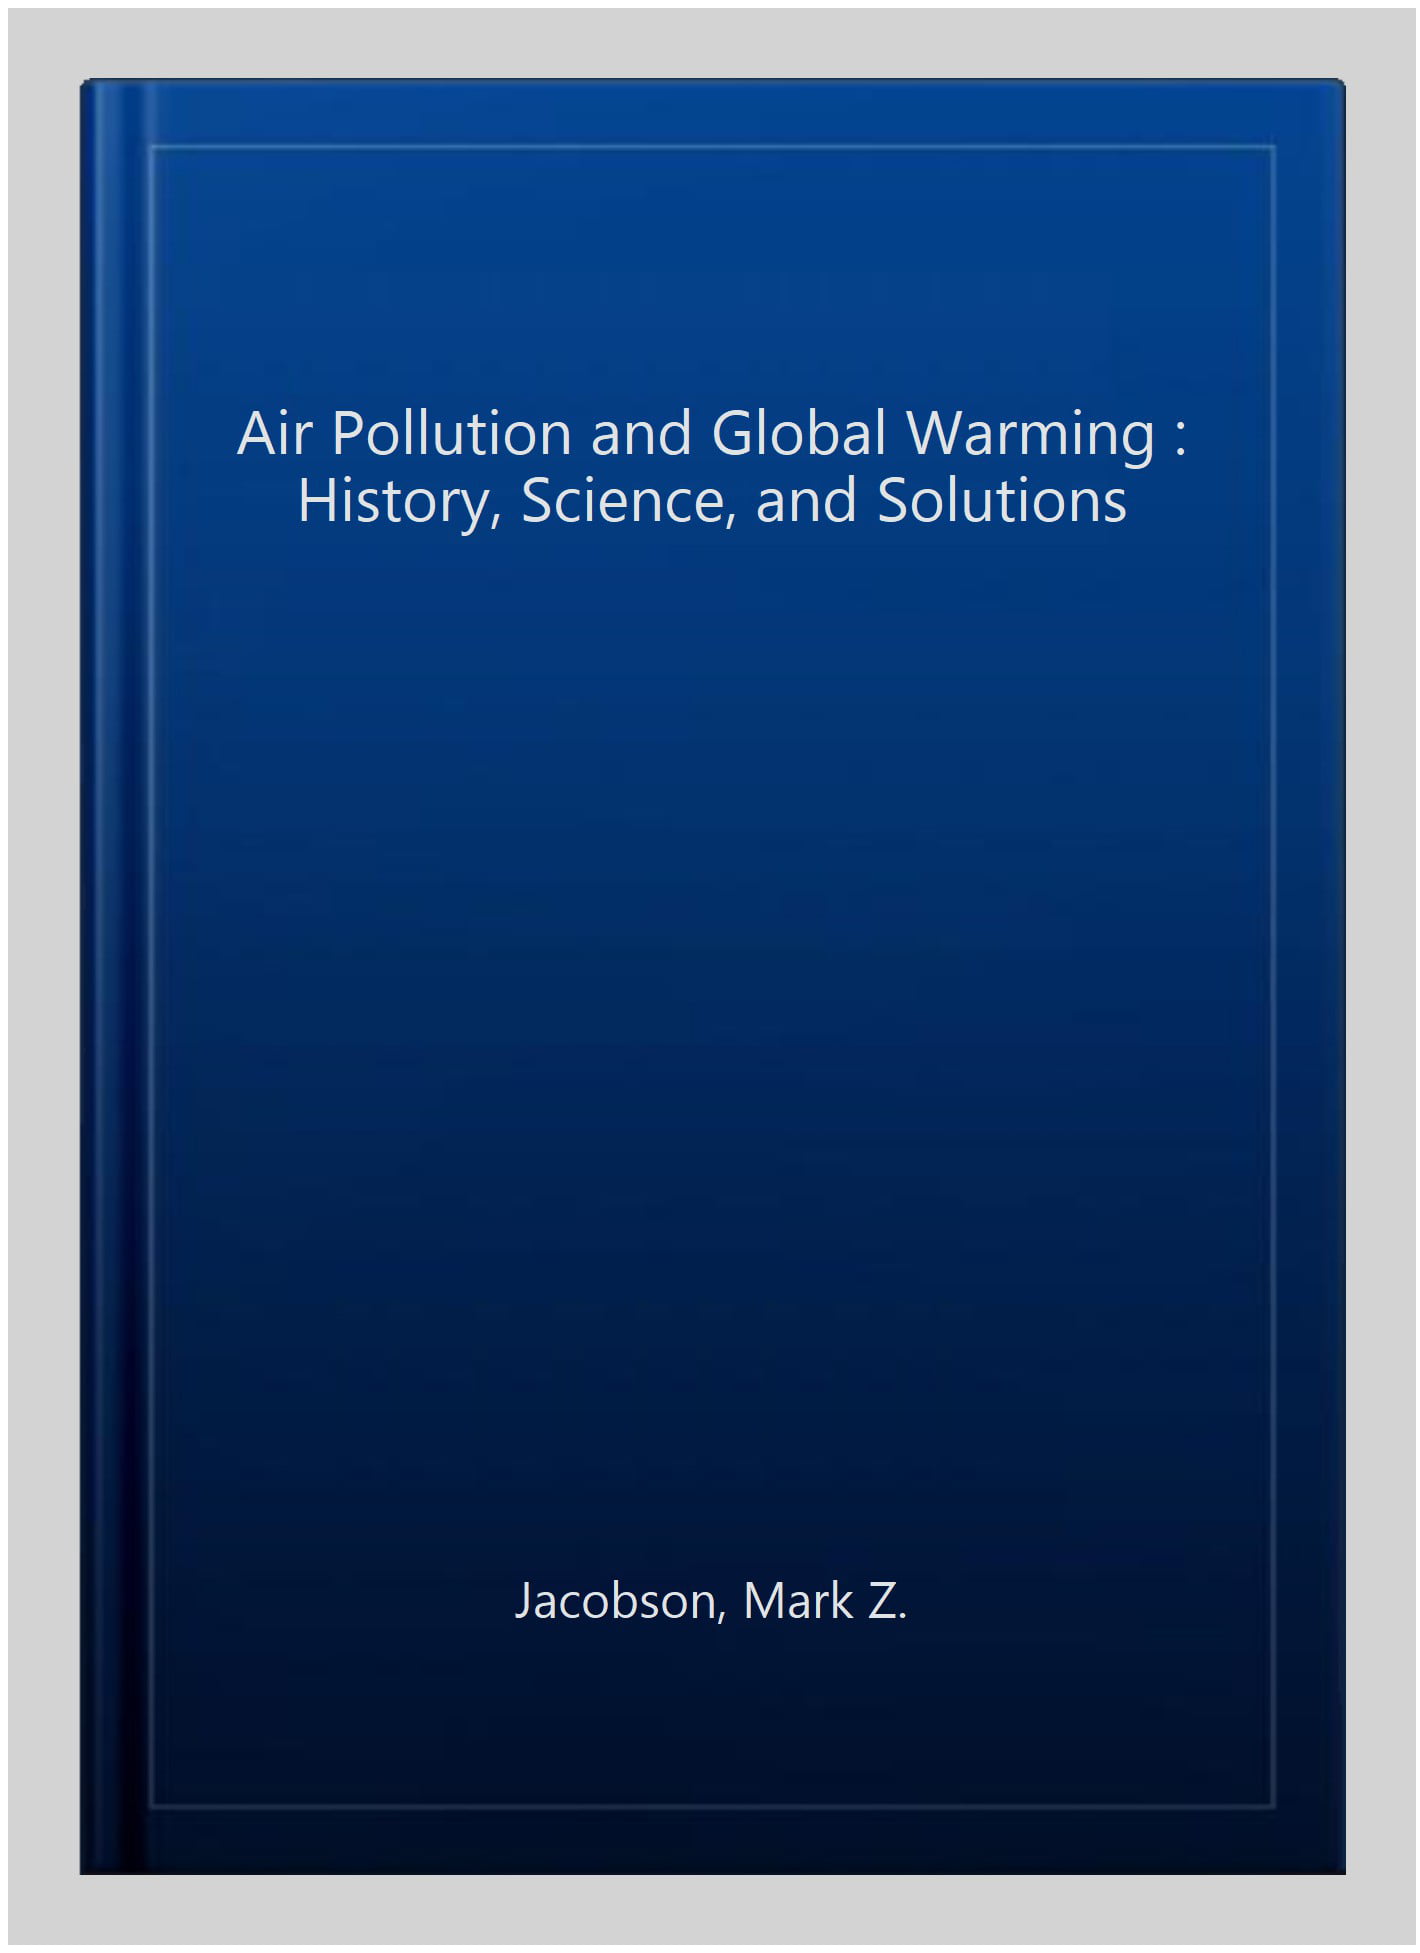 Global　Warming:　and　History　Science　洋書　imusti　and　Pollution　Paperback　Air　Solutions-